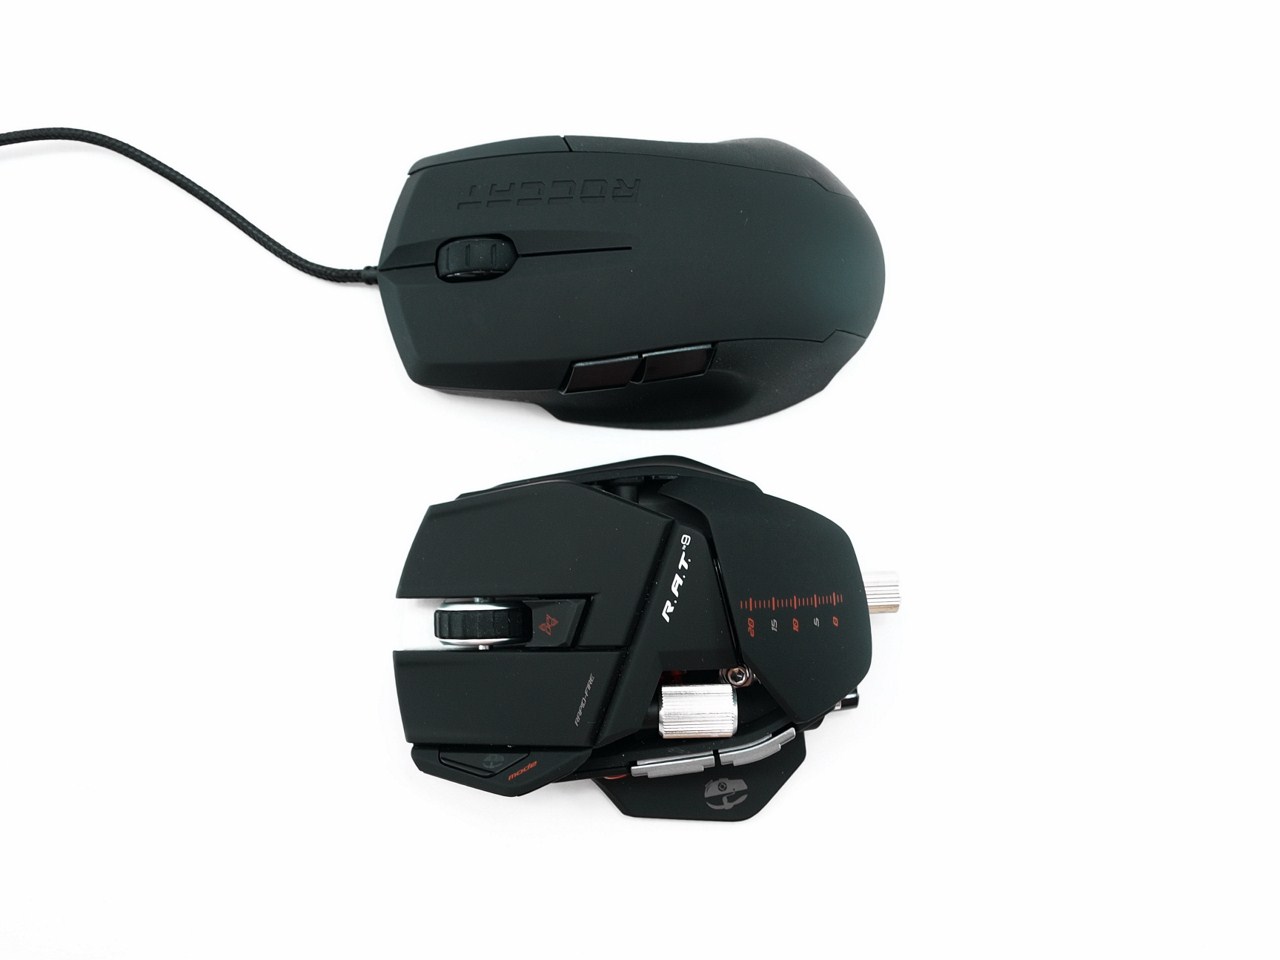 Mad Catz Cyborg Wireless Gaming Mouse Review